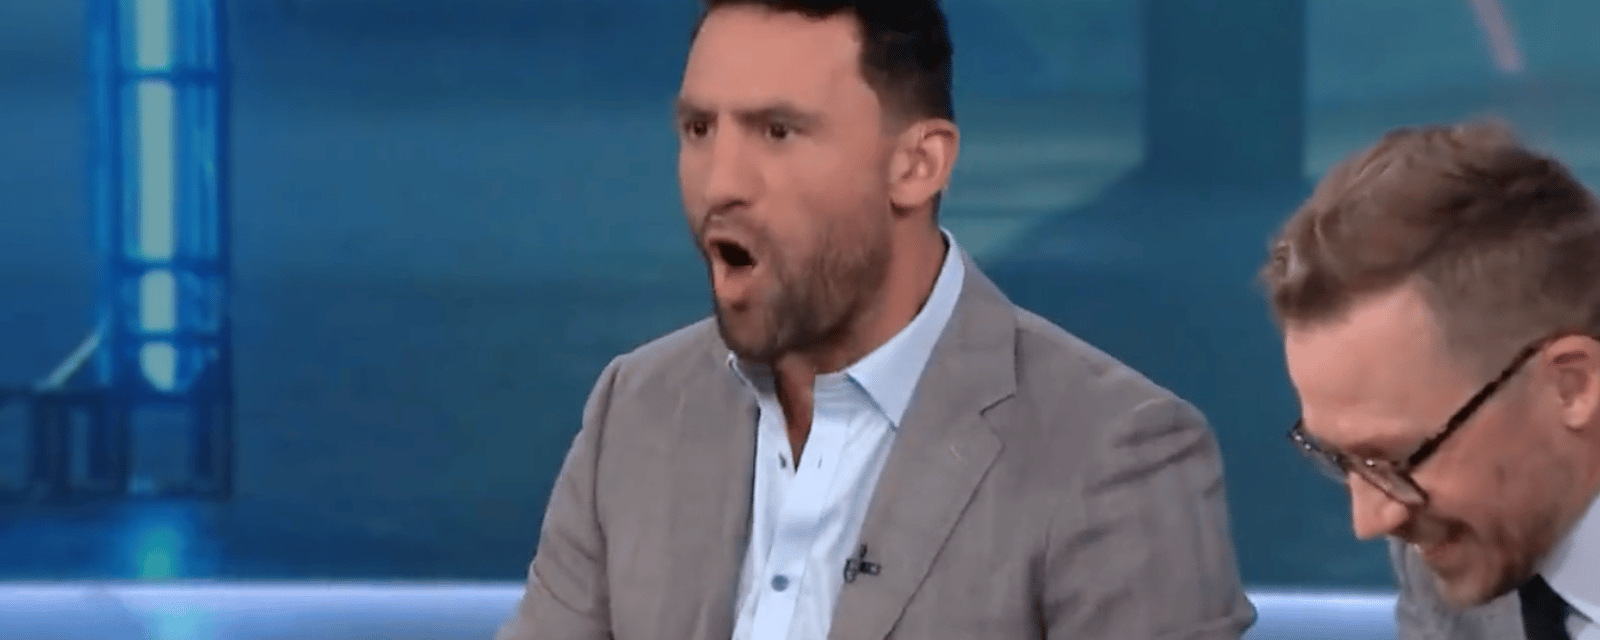 Paul Bissonnette swears on live TV, viewers want him off the air 